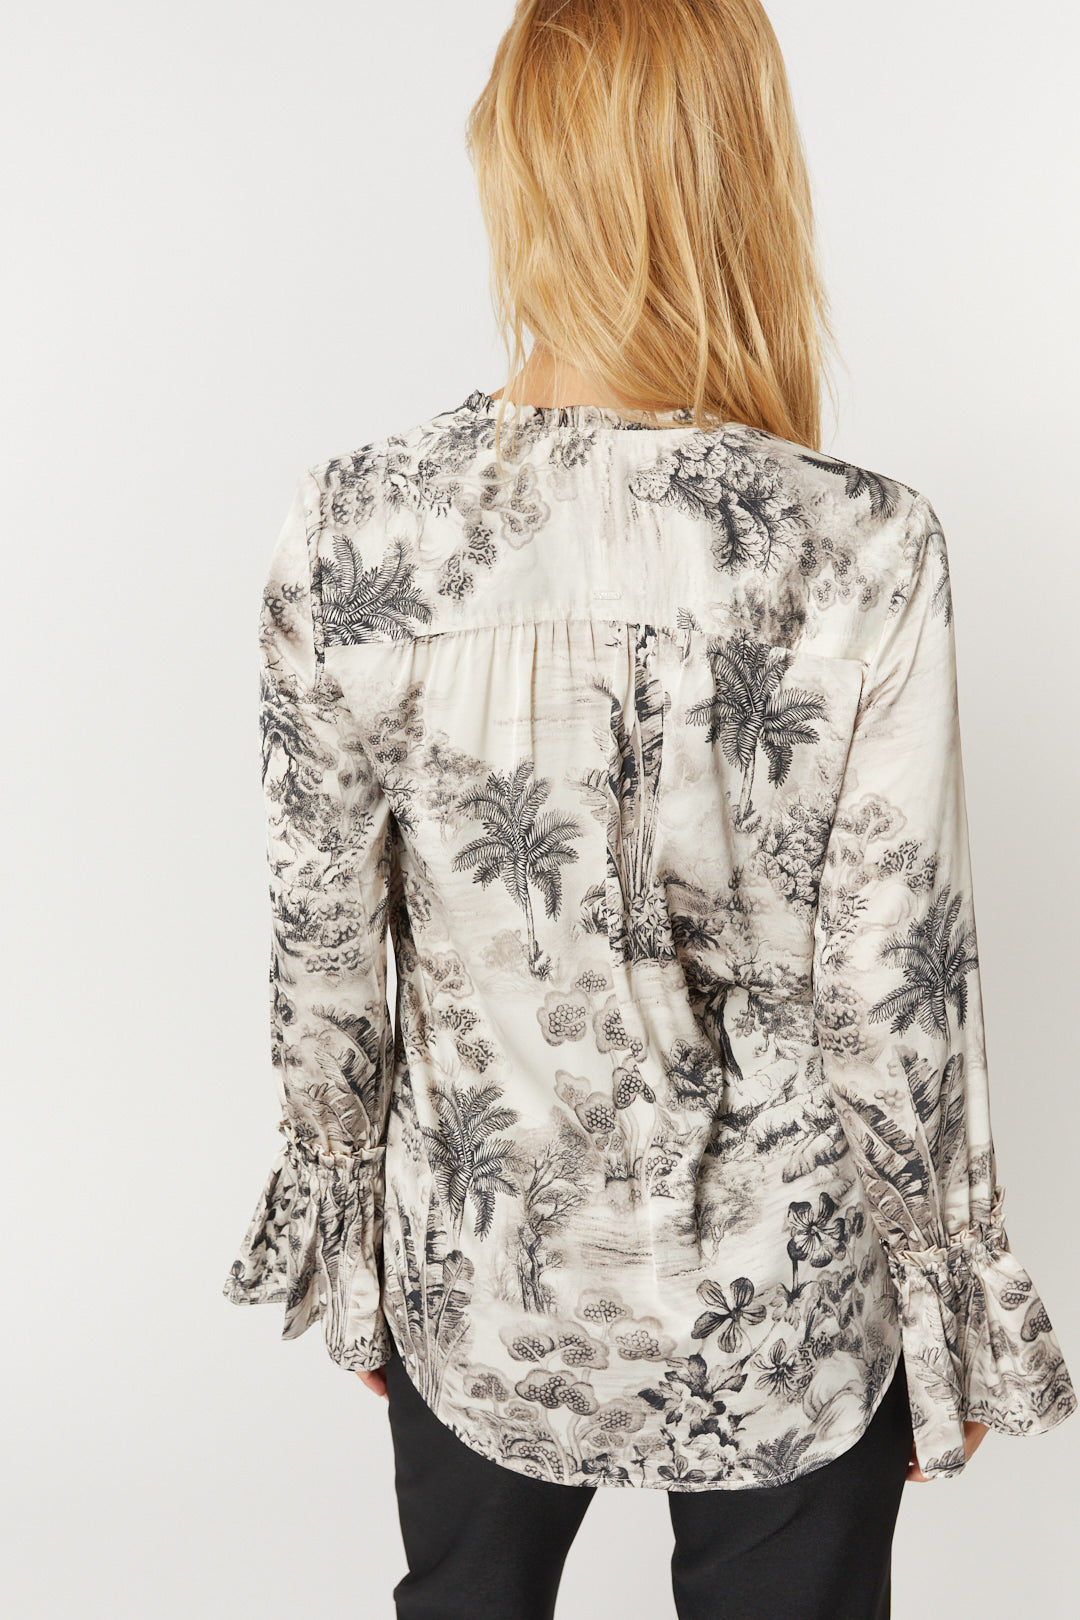 Ivory shirt with black patterns | Elzy